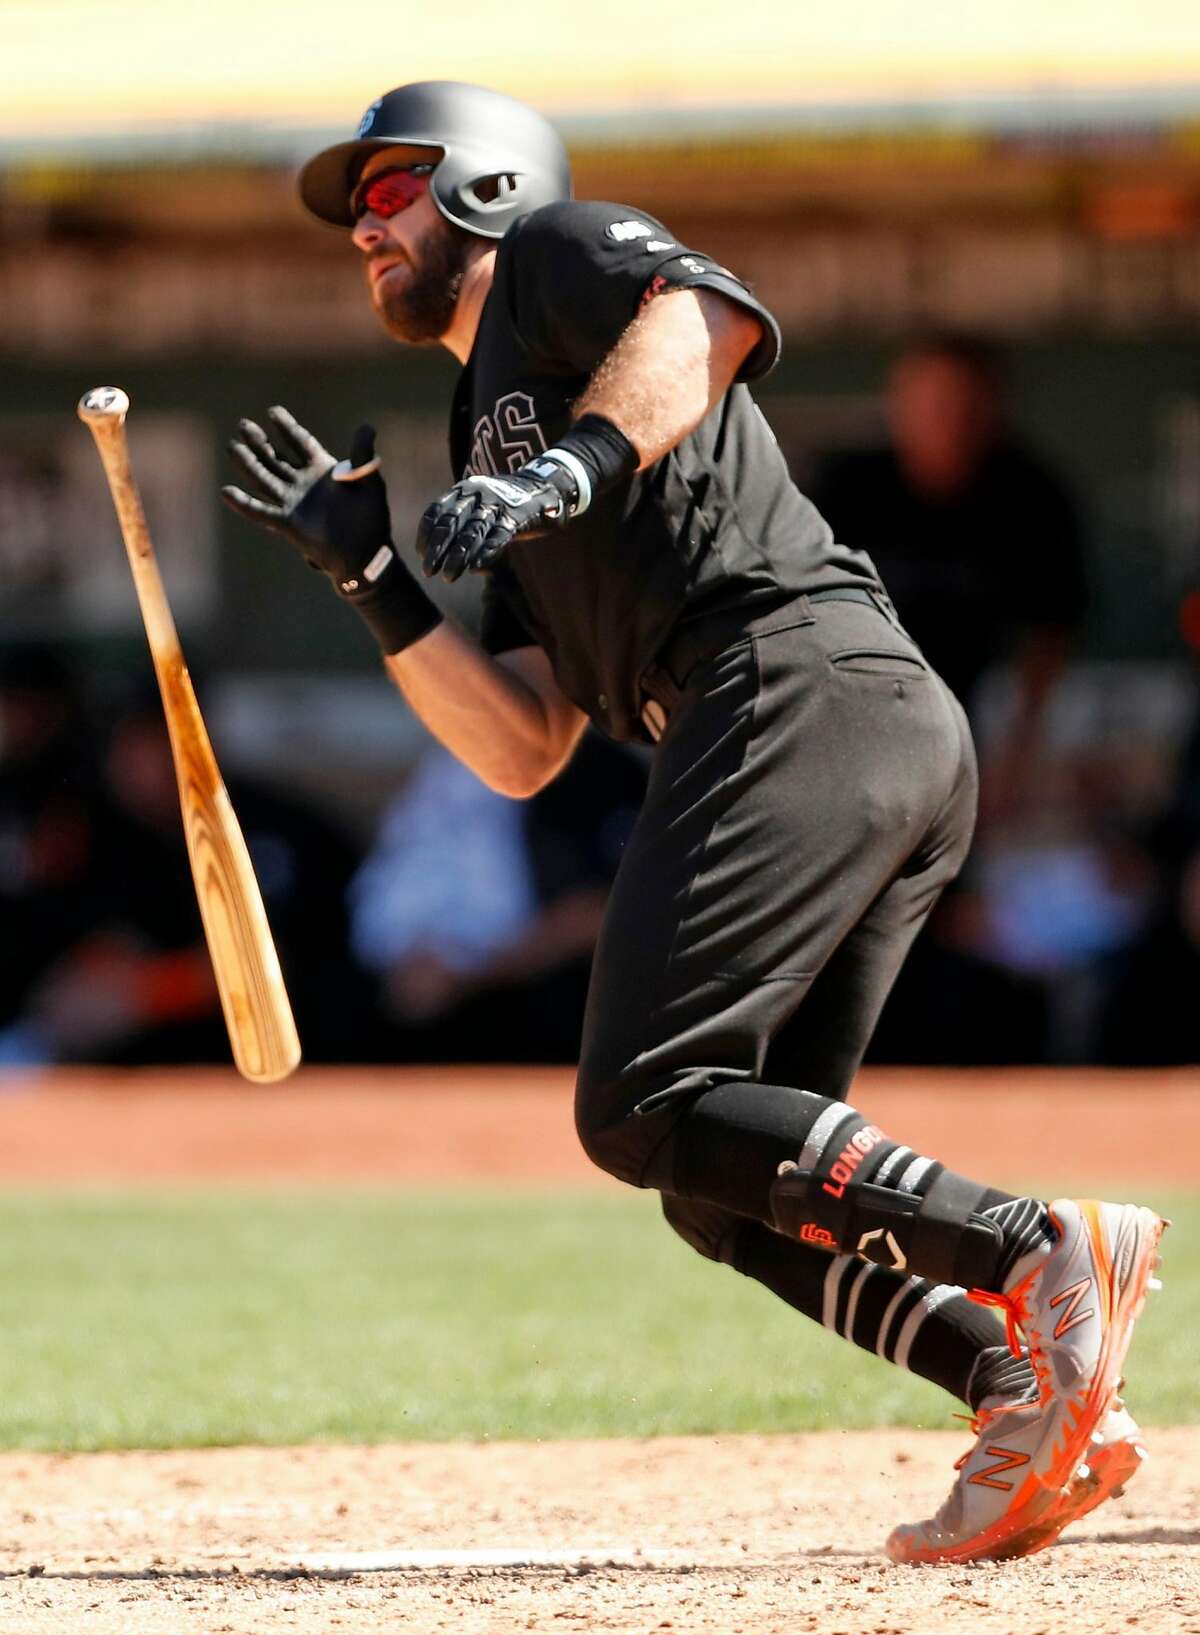 San Francisco Giants' Evan Longoria watches his go-ahead 2-run single in 7th inning against Oakland Athletics during MLB game at Oakland Coliseum in Oakland, Calif., on Sunday, August 25, 2019.